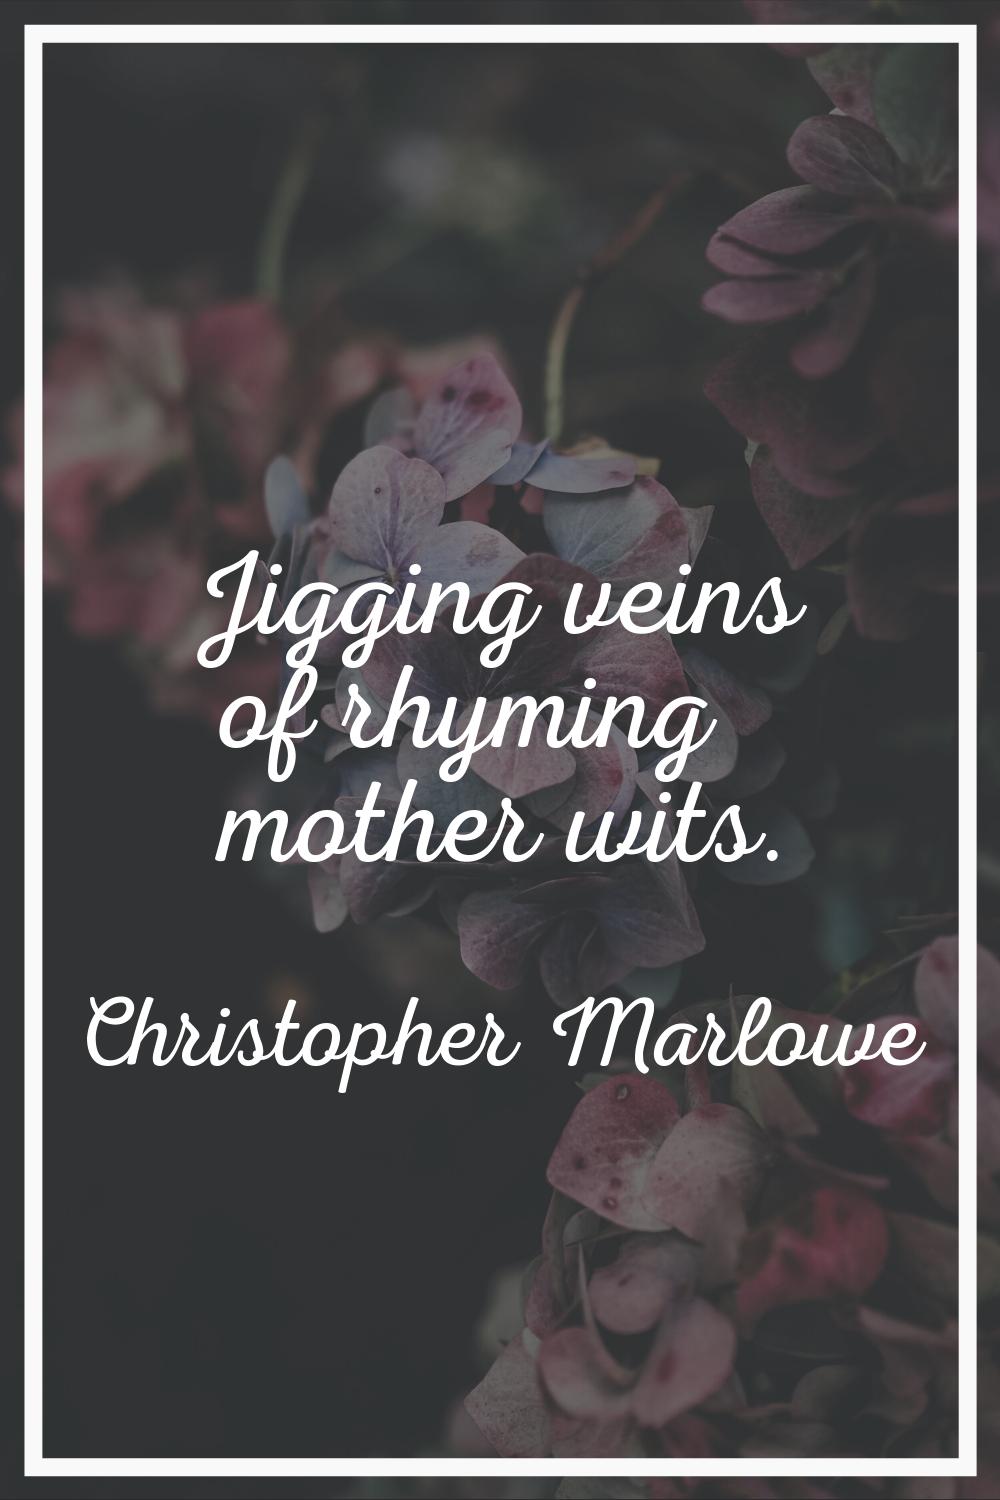 Jigging veins of rhyming mother wits.